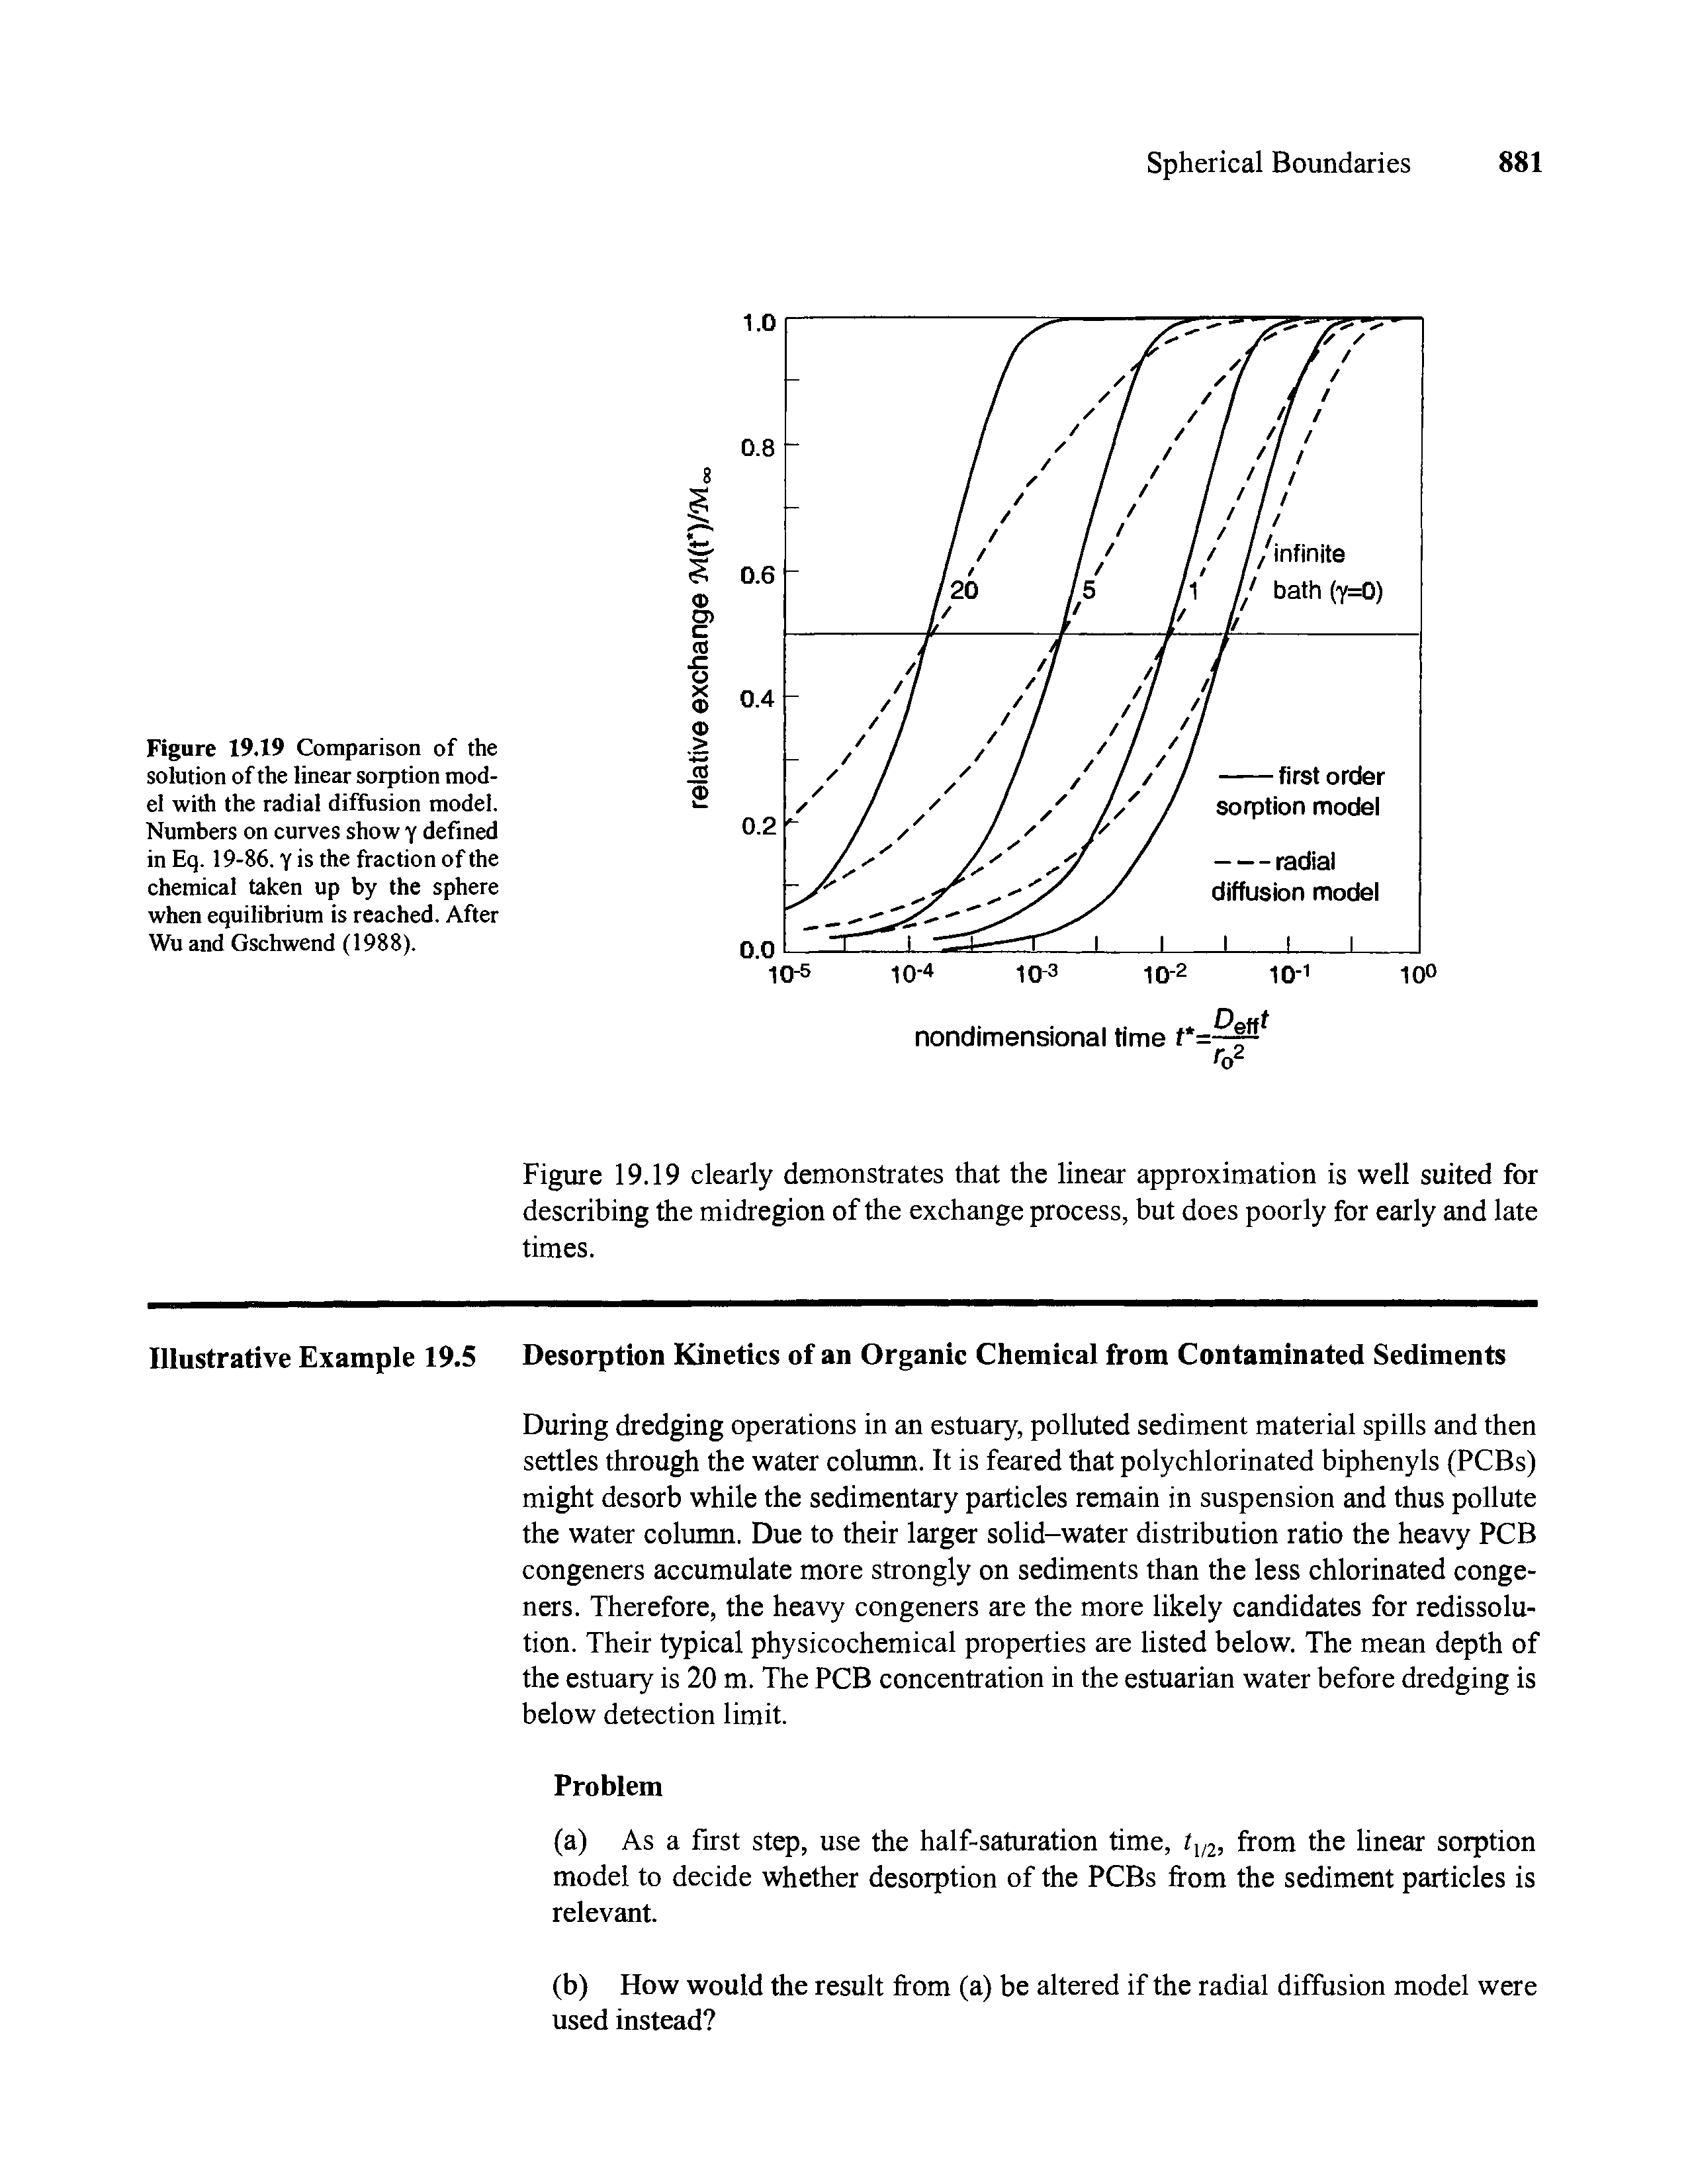 Figure 19.19 Comparison of the solution of the linear sorption model with the radial diffusion model. Numbers on curves show y defined in Eq. 19-86. Y is the fraction of the chemical taken up by the sphere when equilibrium is reached. After Wu and Gschwend (1988).